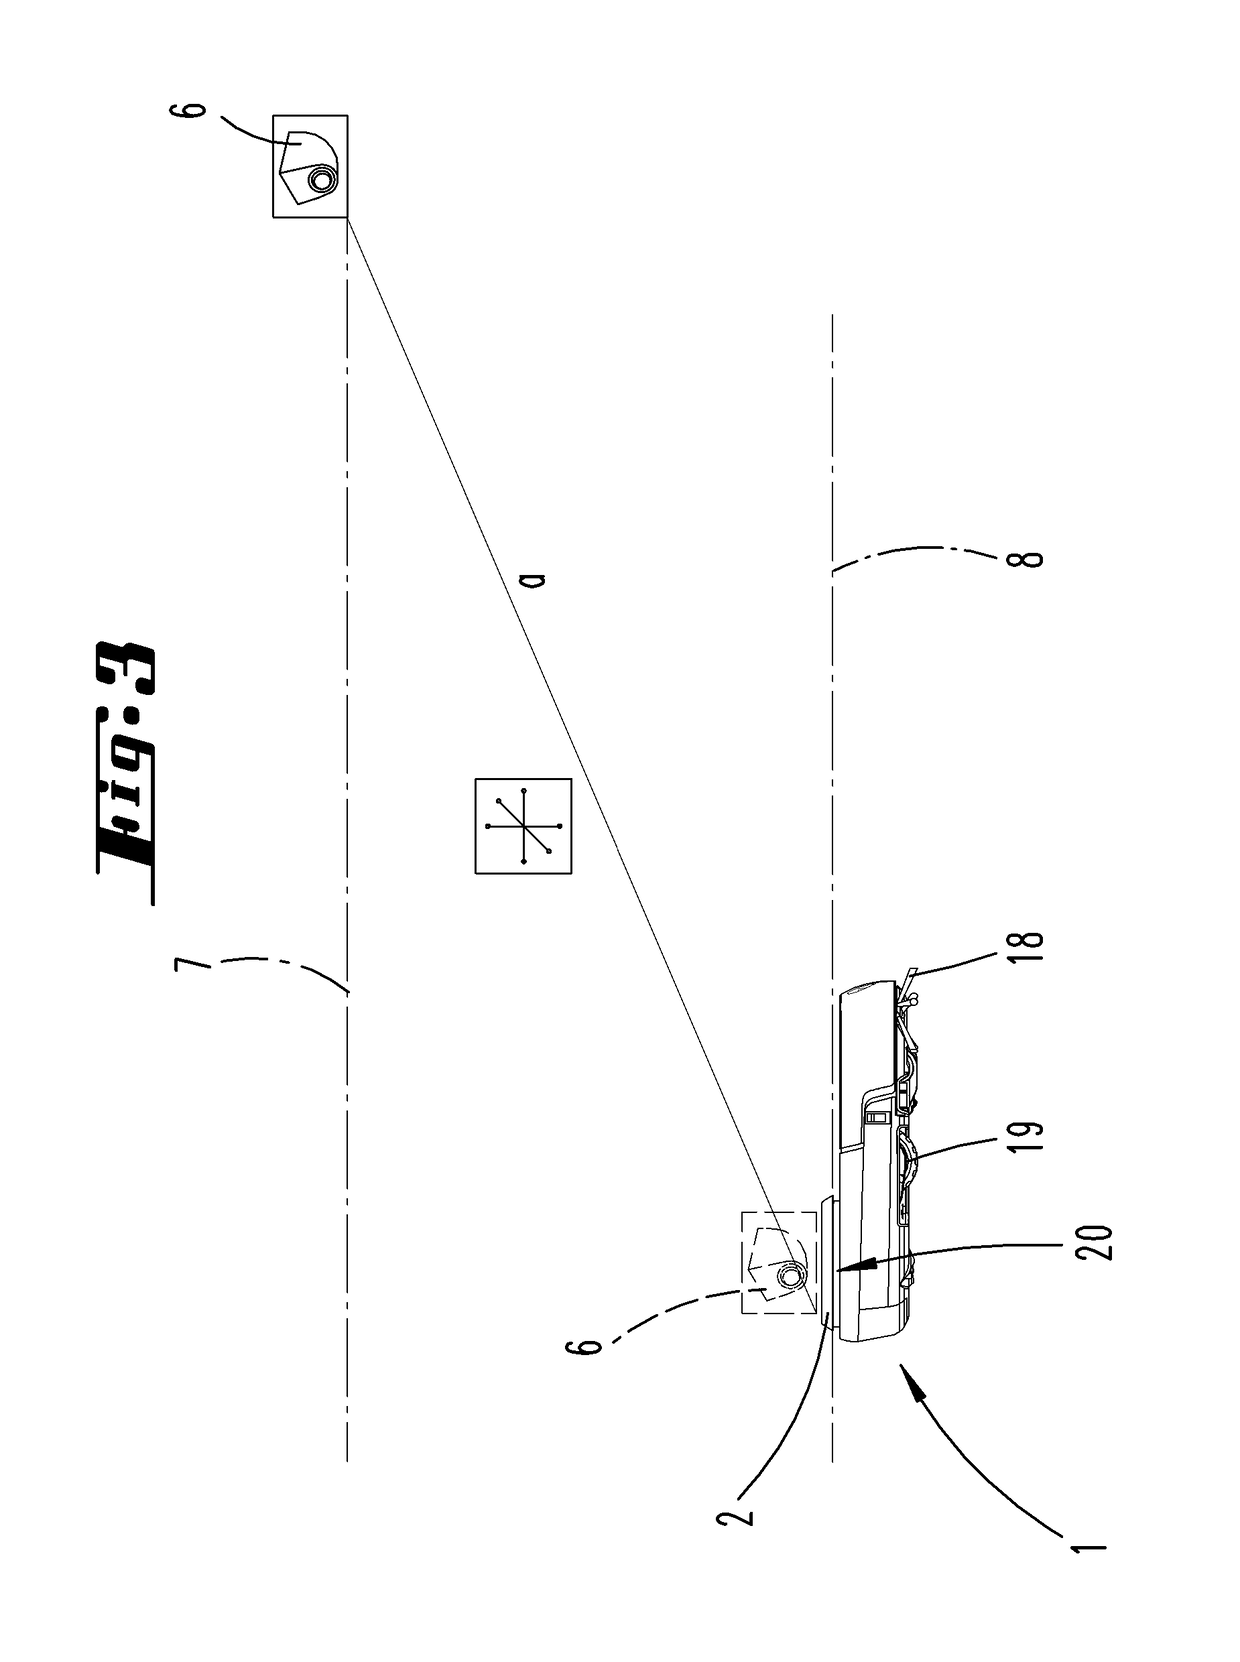 Method for creating an environment map for an automatically moveable processing device